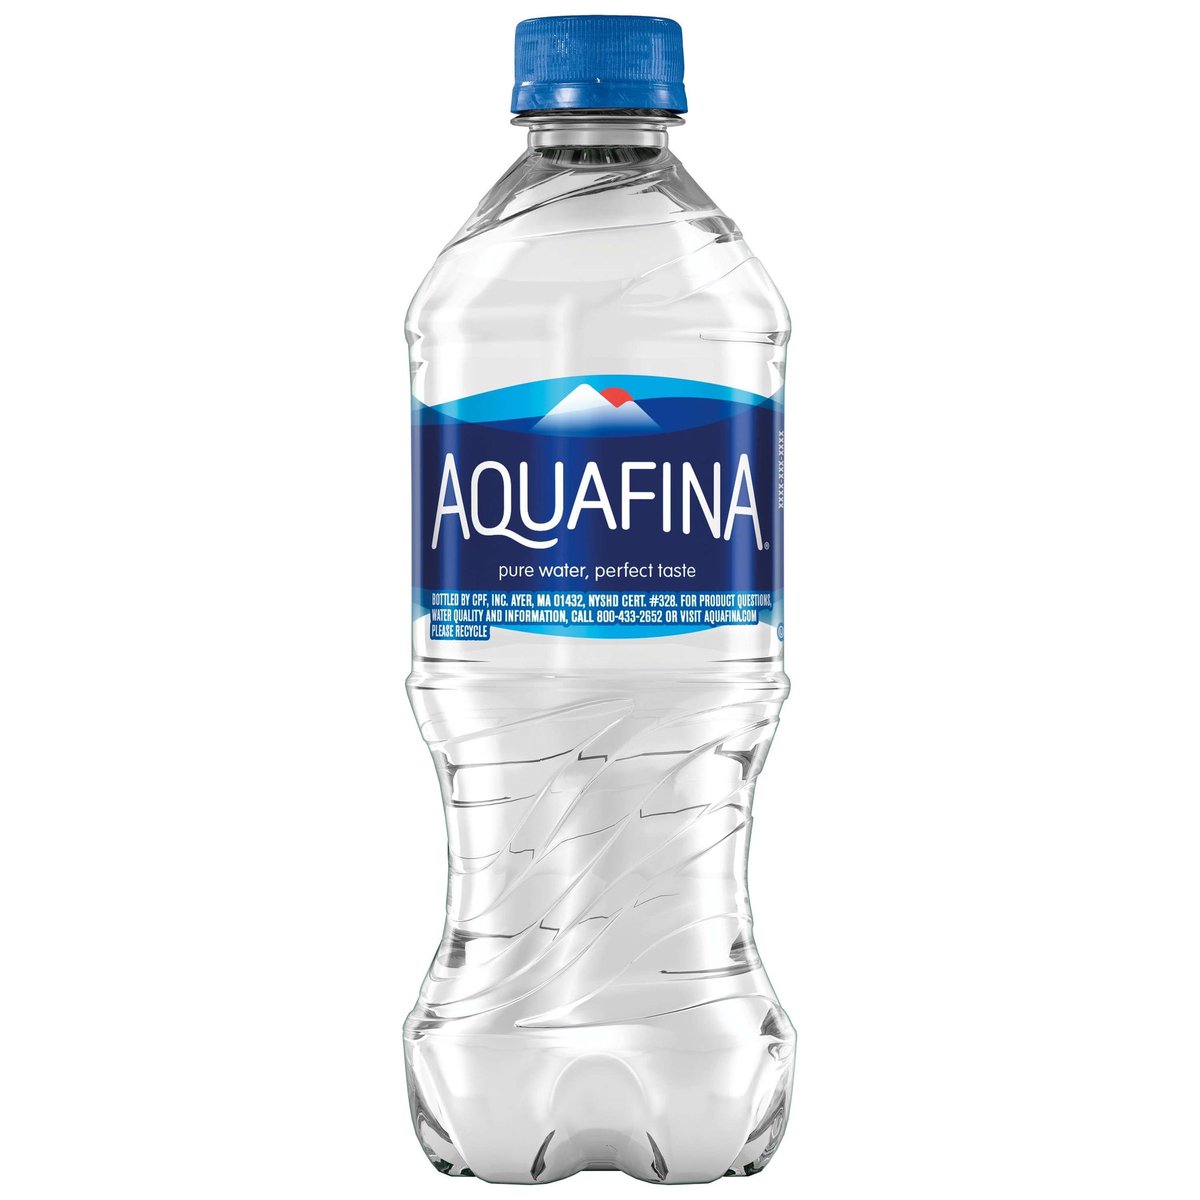 6. lantus — aquafina a staple for many, feels like high school, more acidic than other brands so, tingly